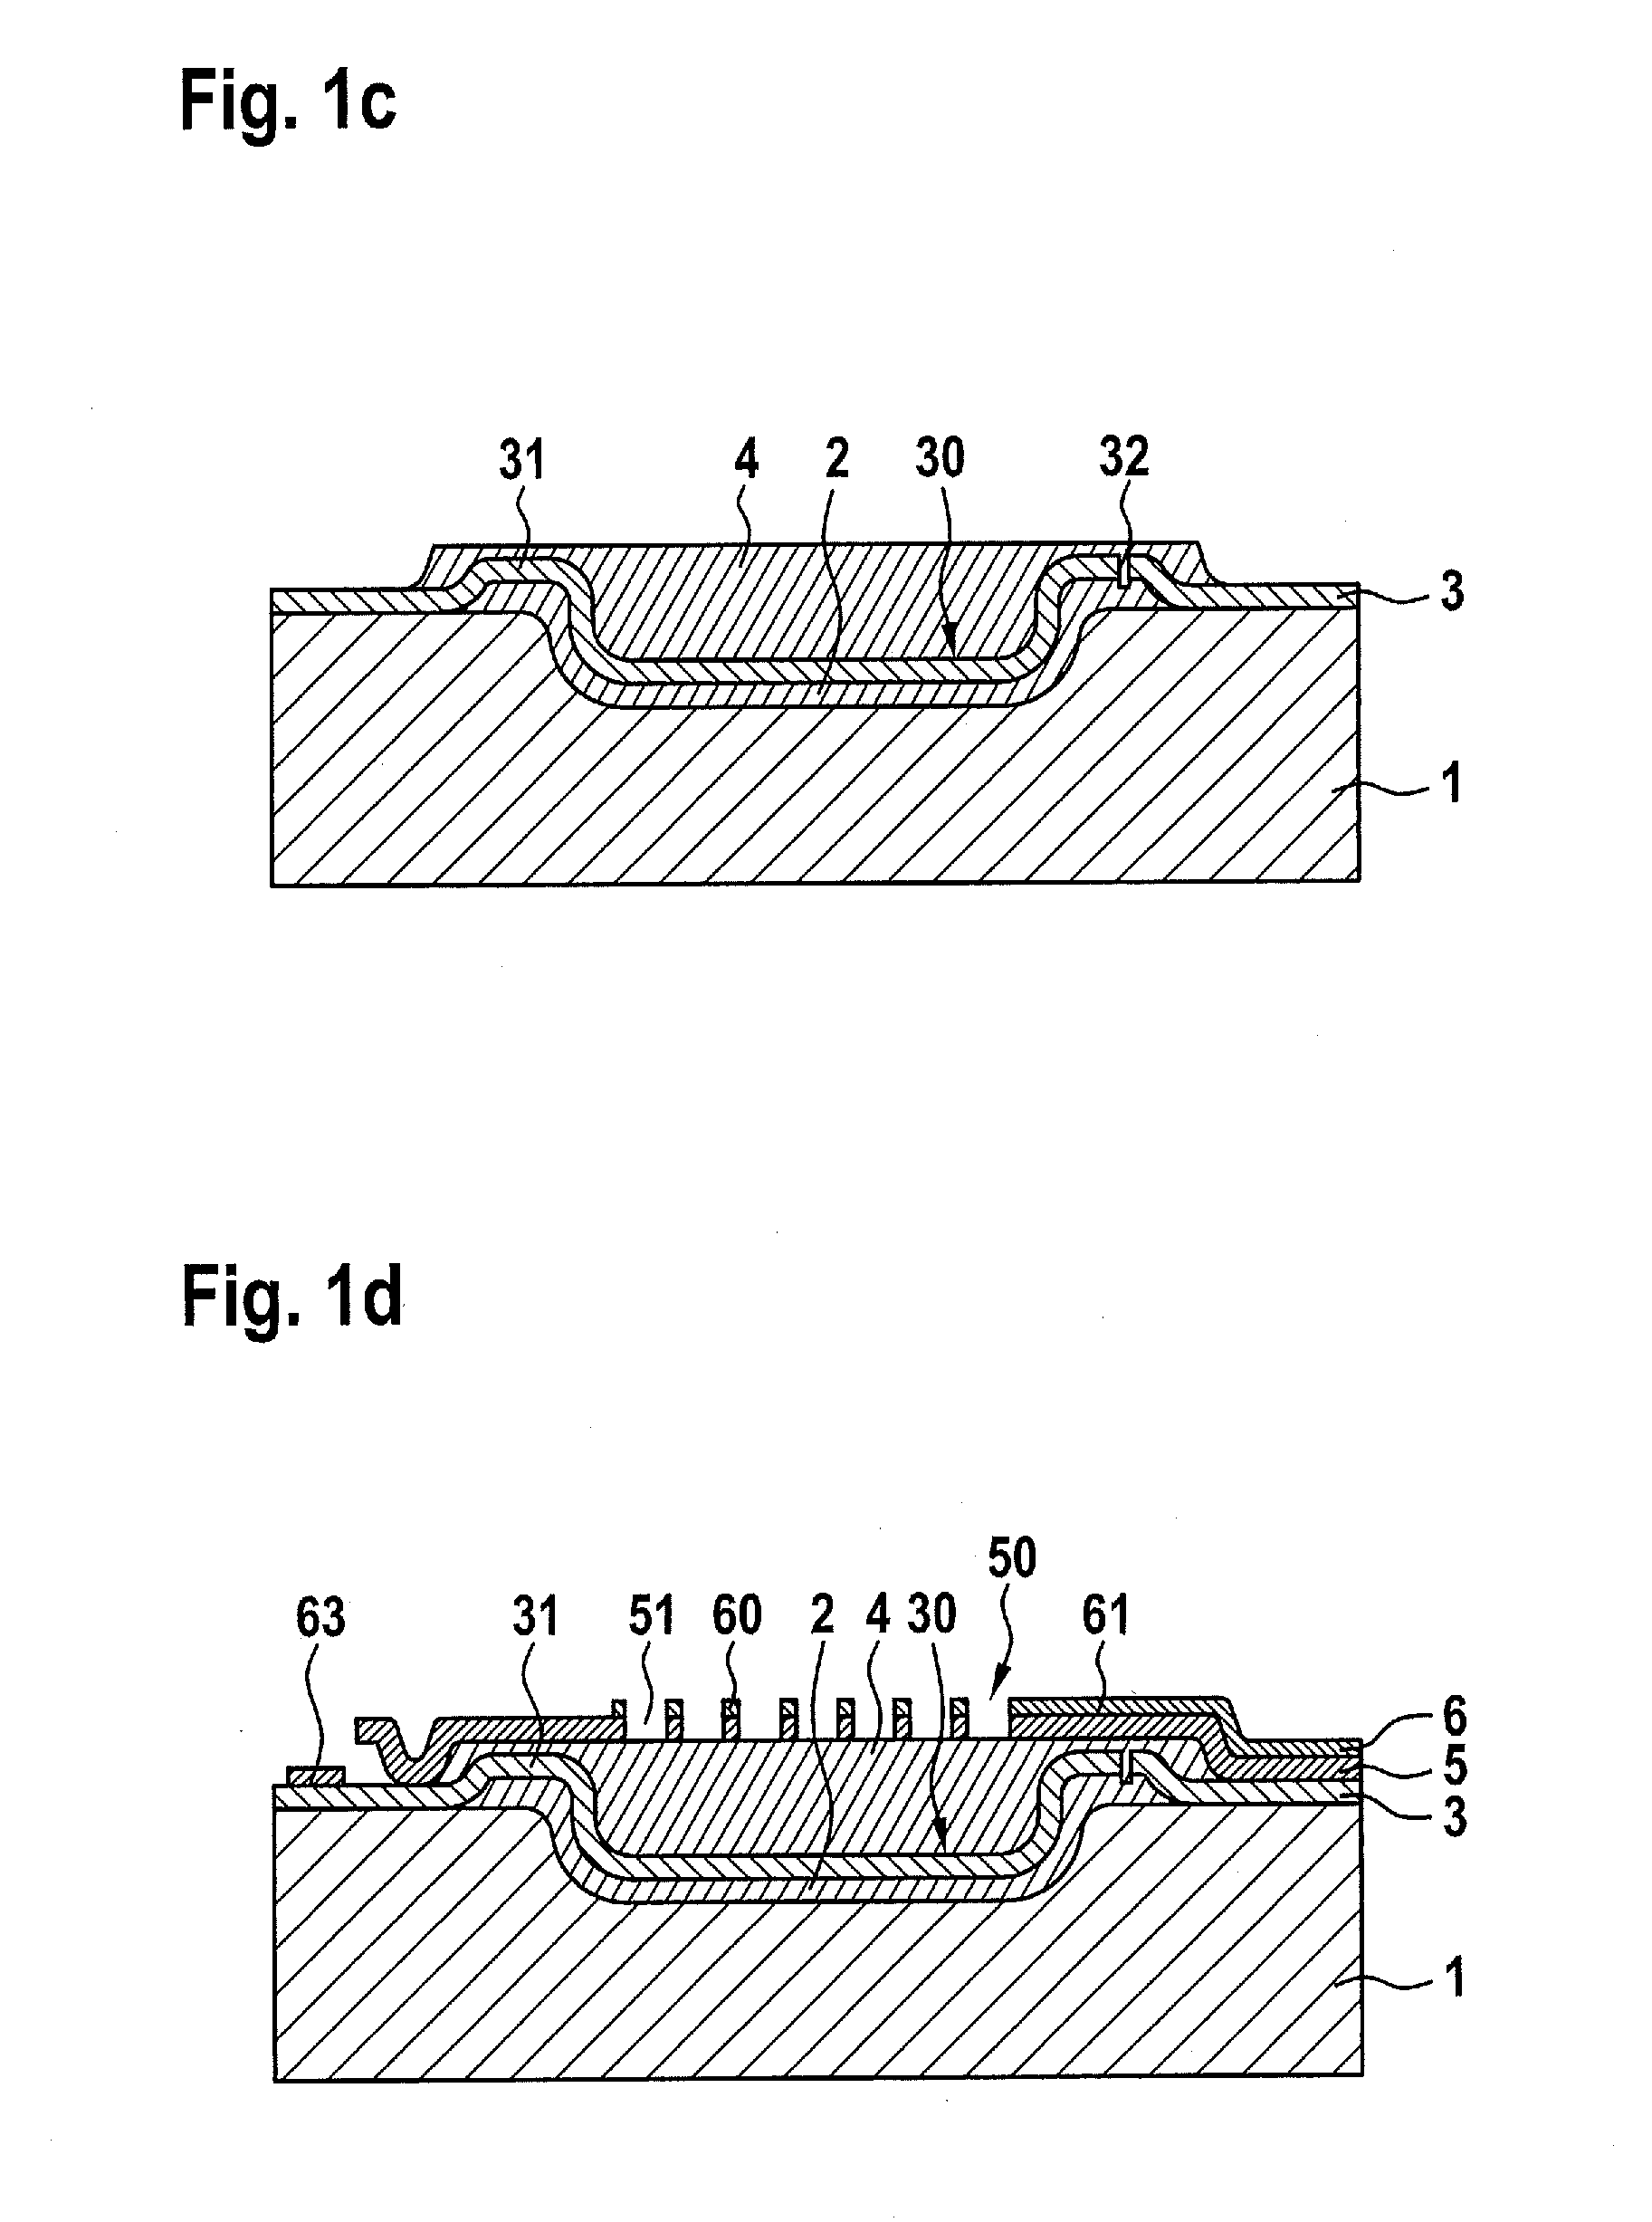 MEMS device having a microphone structure, and method for the production thereof